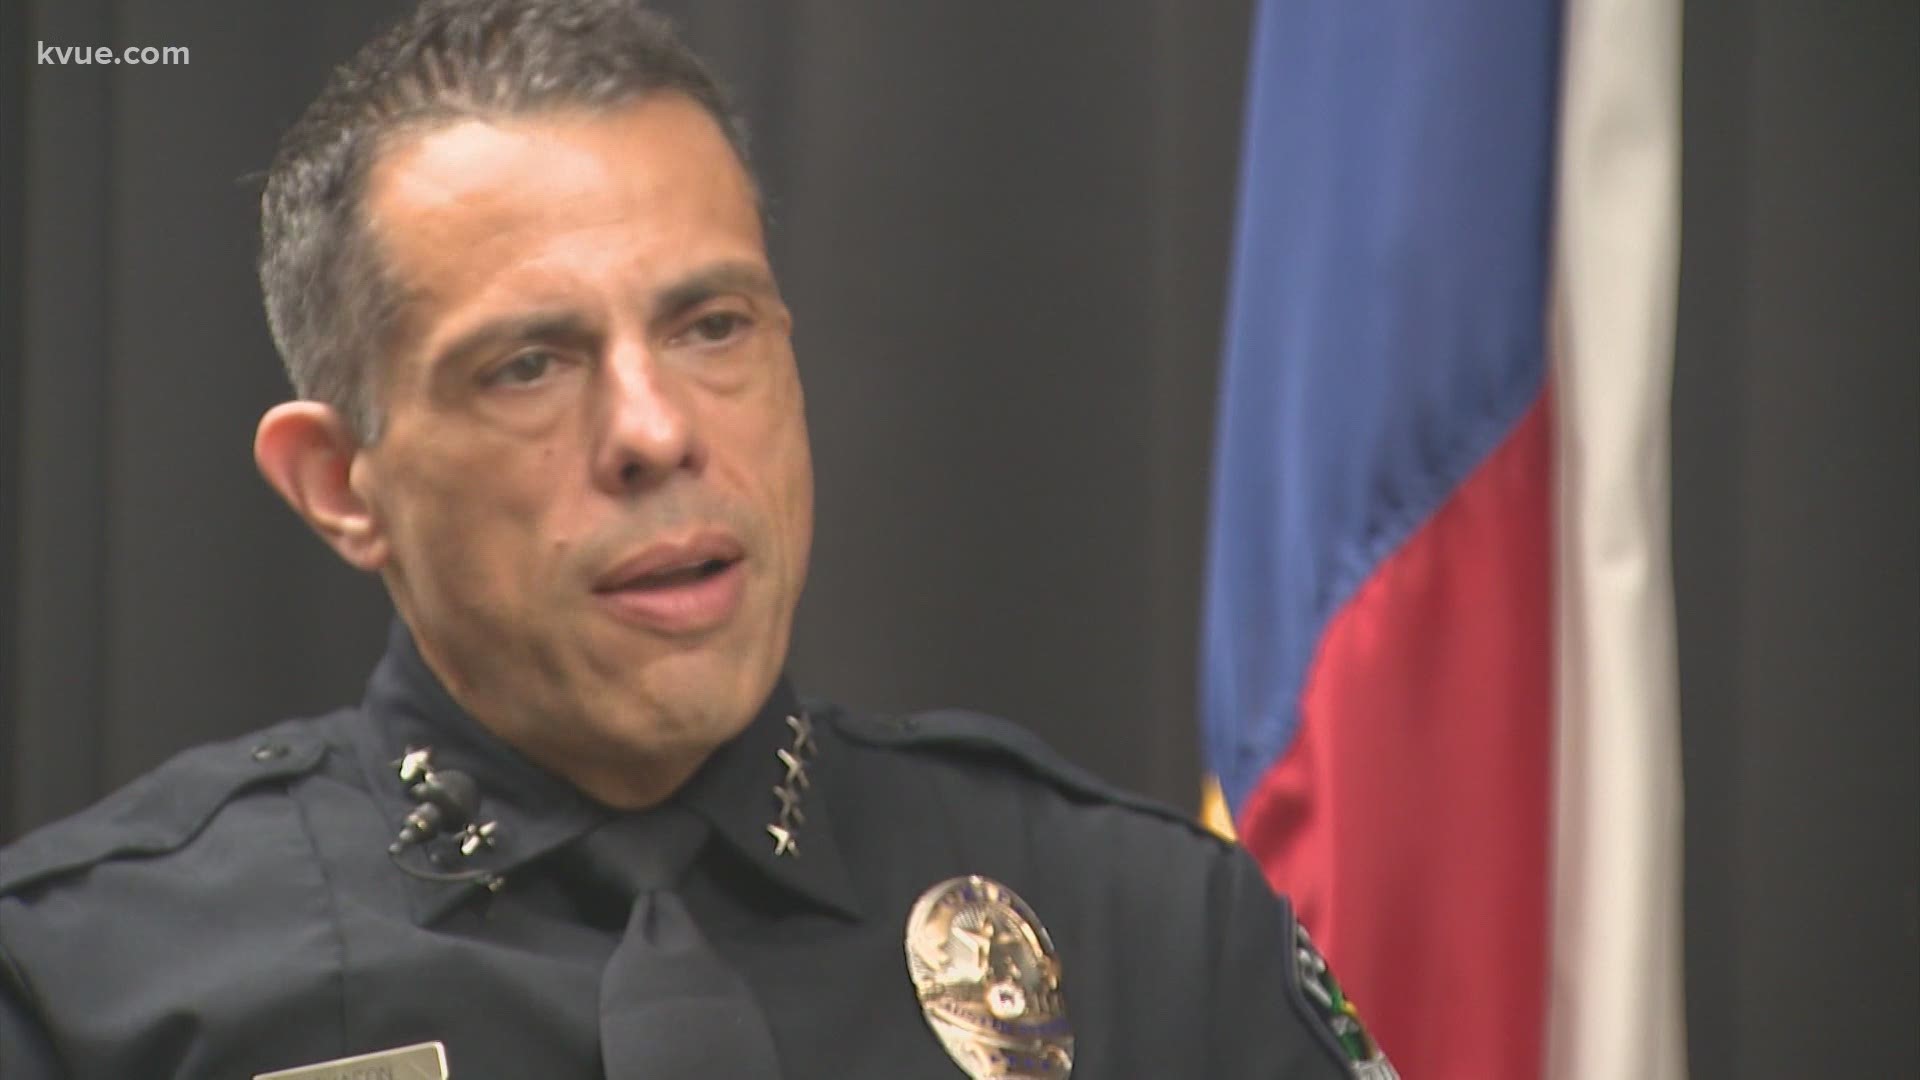 The City of Austin needs your input as leaders work to find the next police chief.